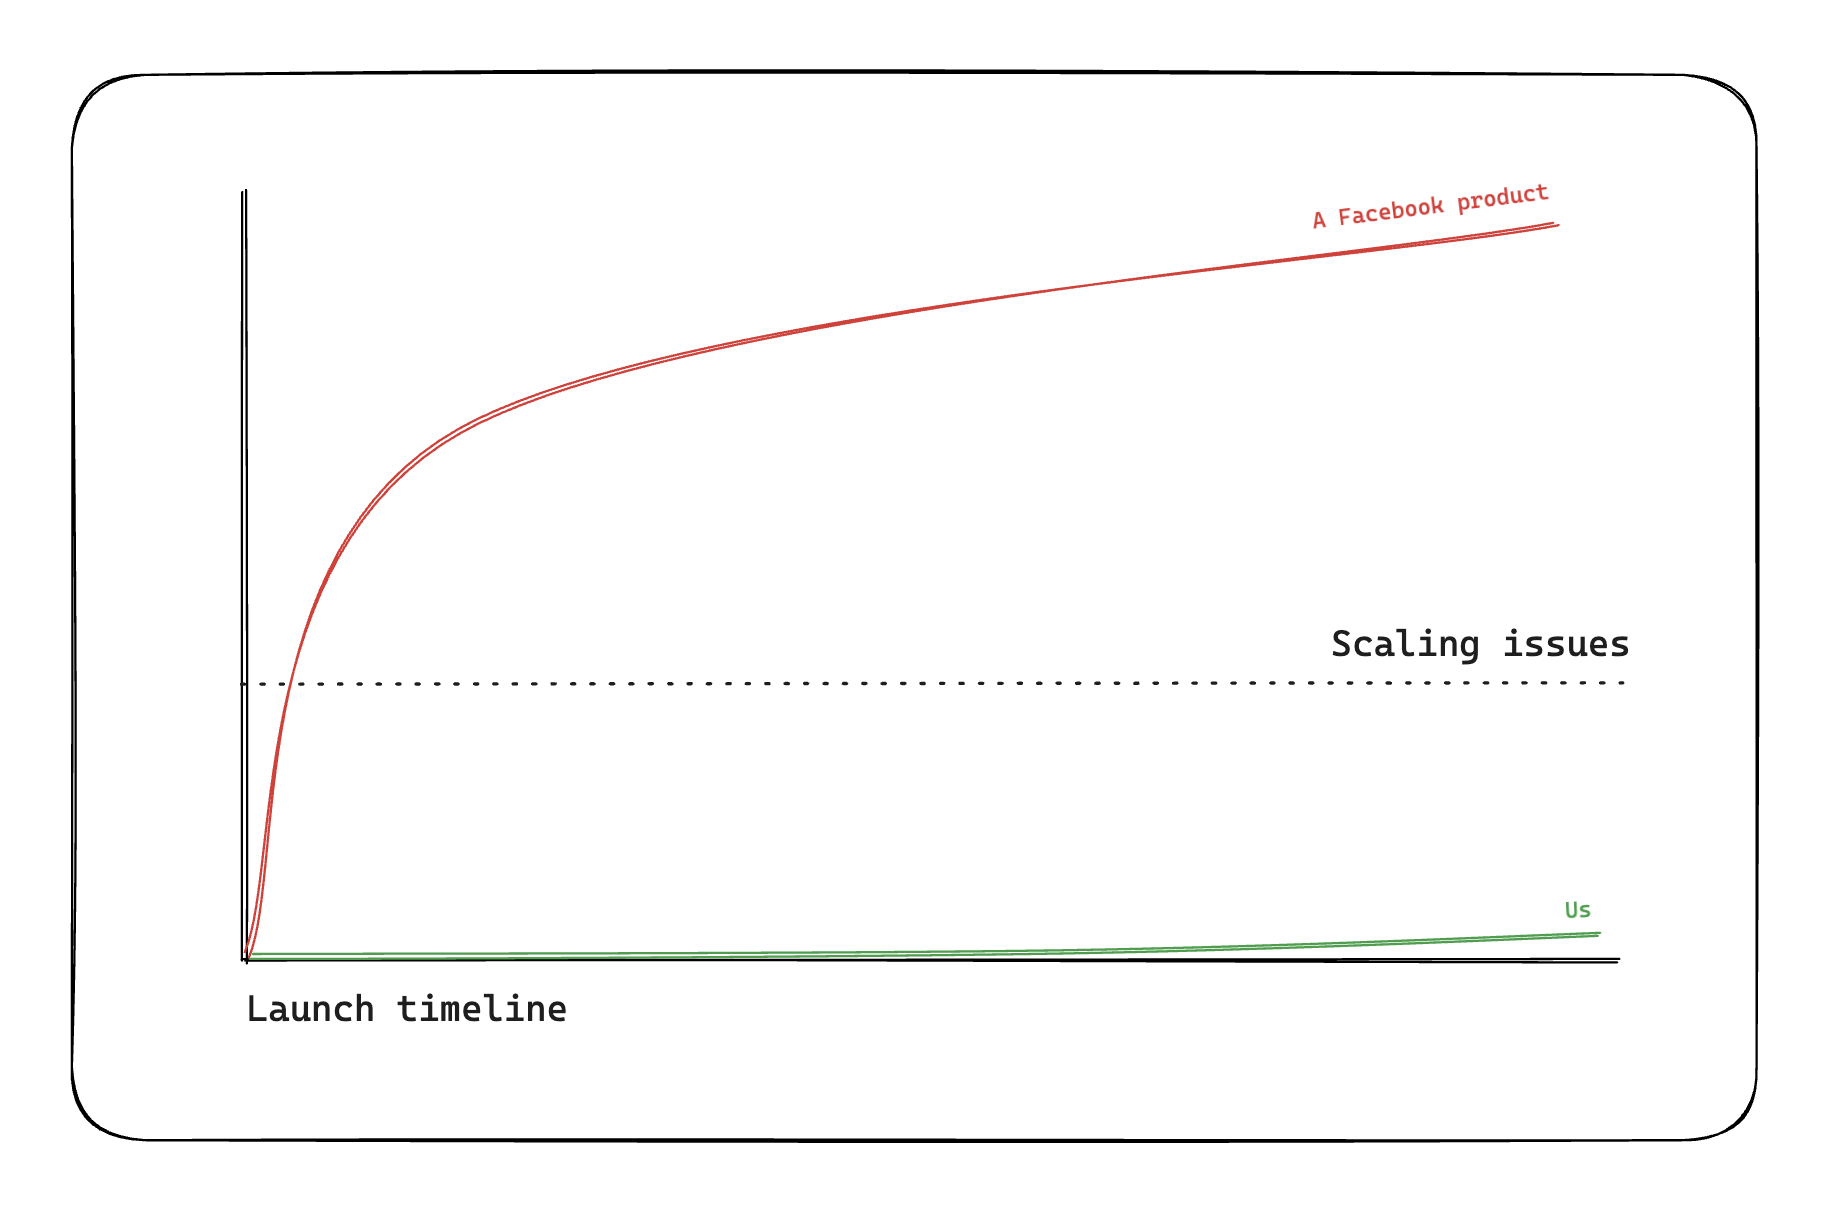 A graph with two lines showing that big company launches soar past scaling issues while startup launches may not